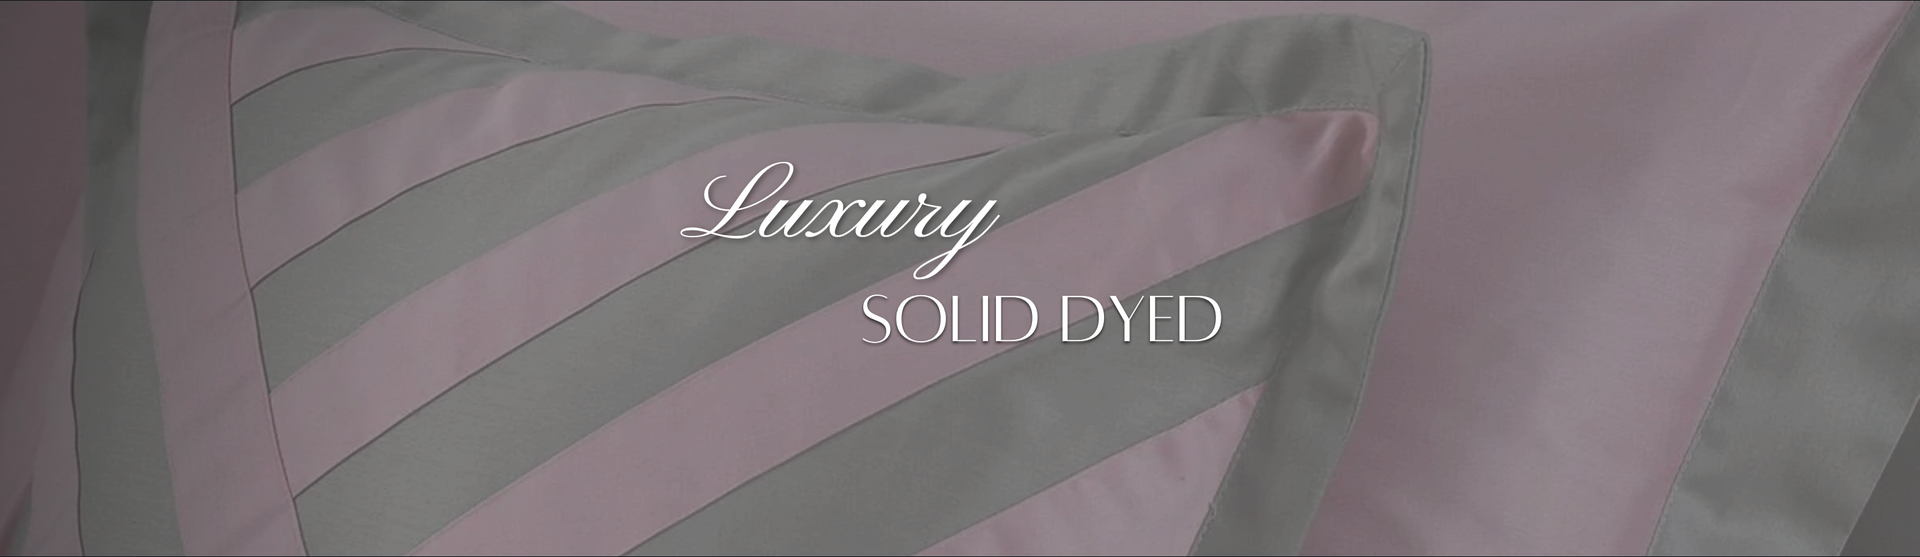 Bedding - Luxury - Solid Dyed